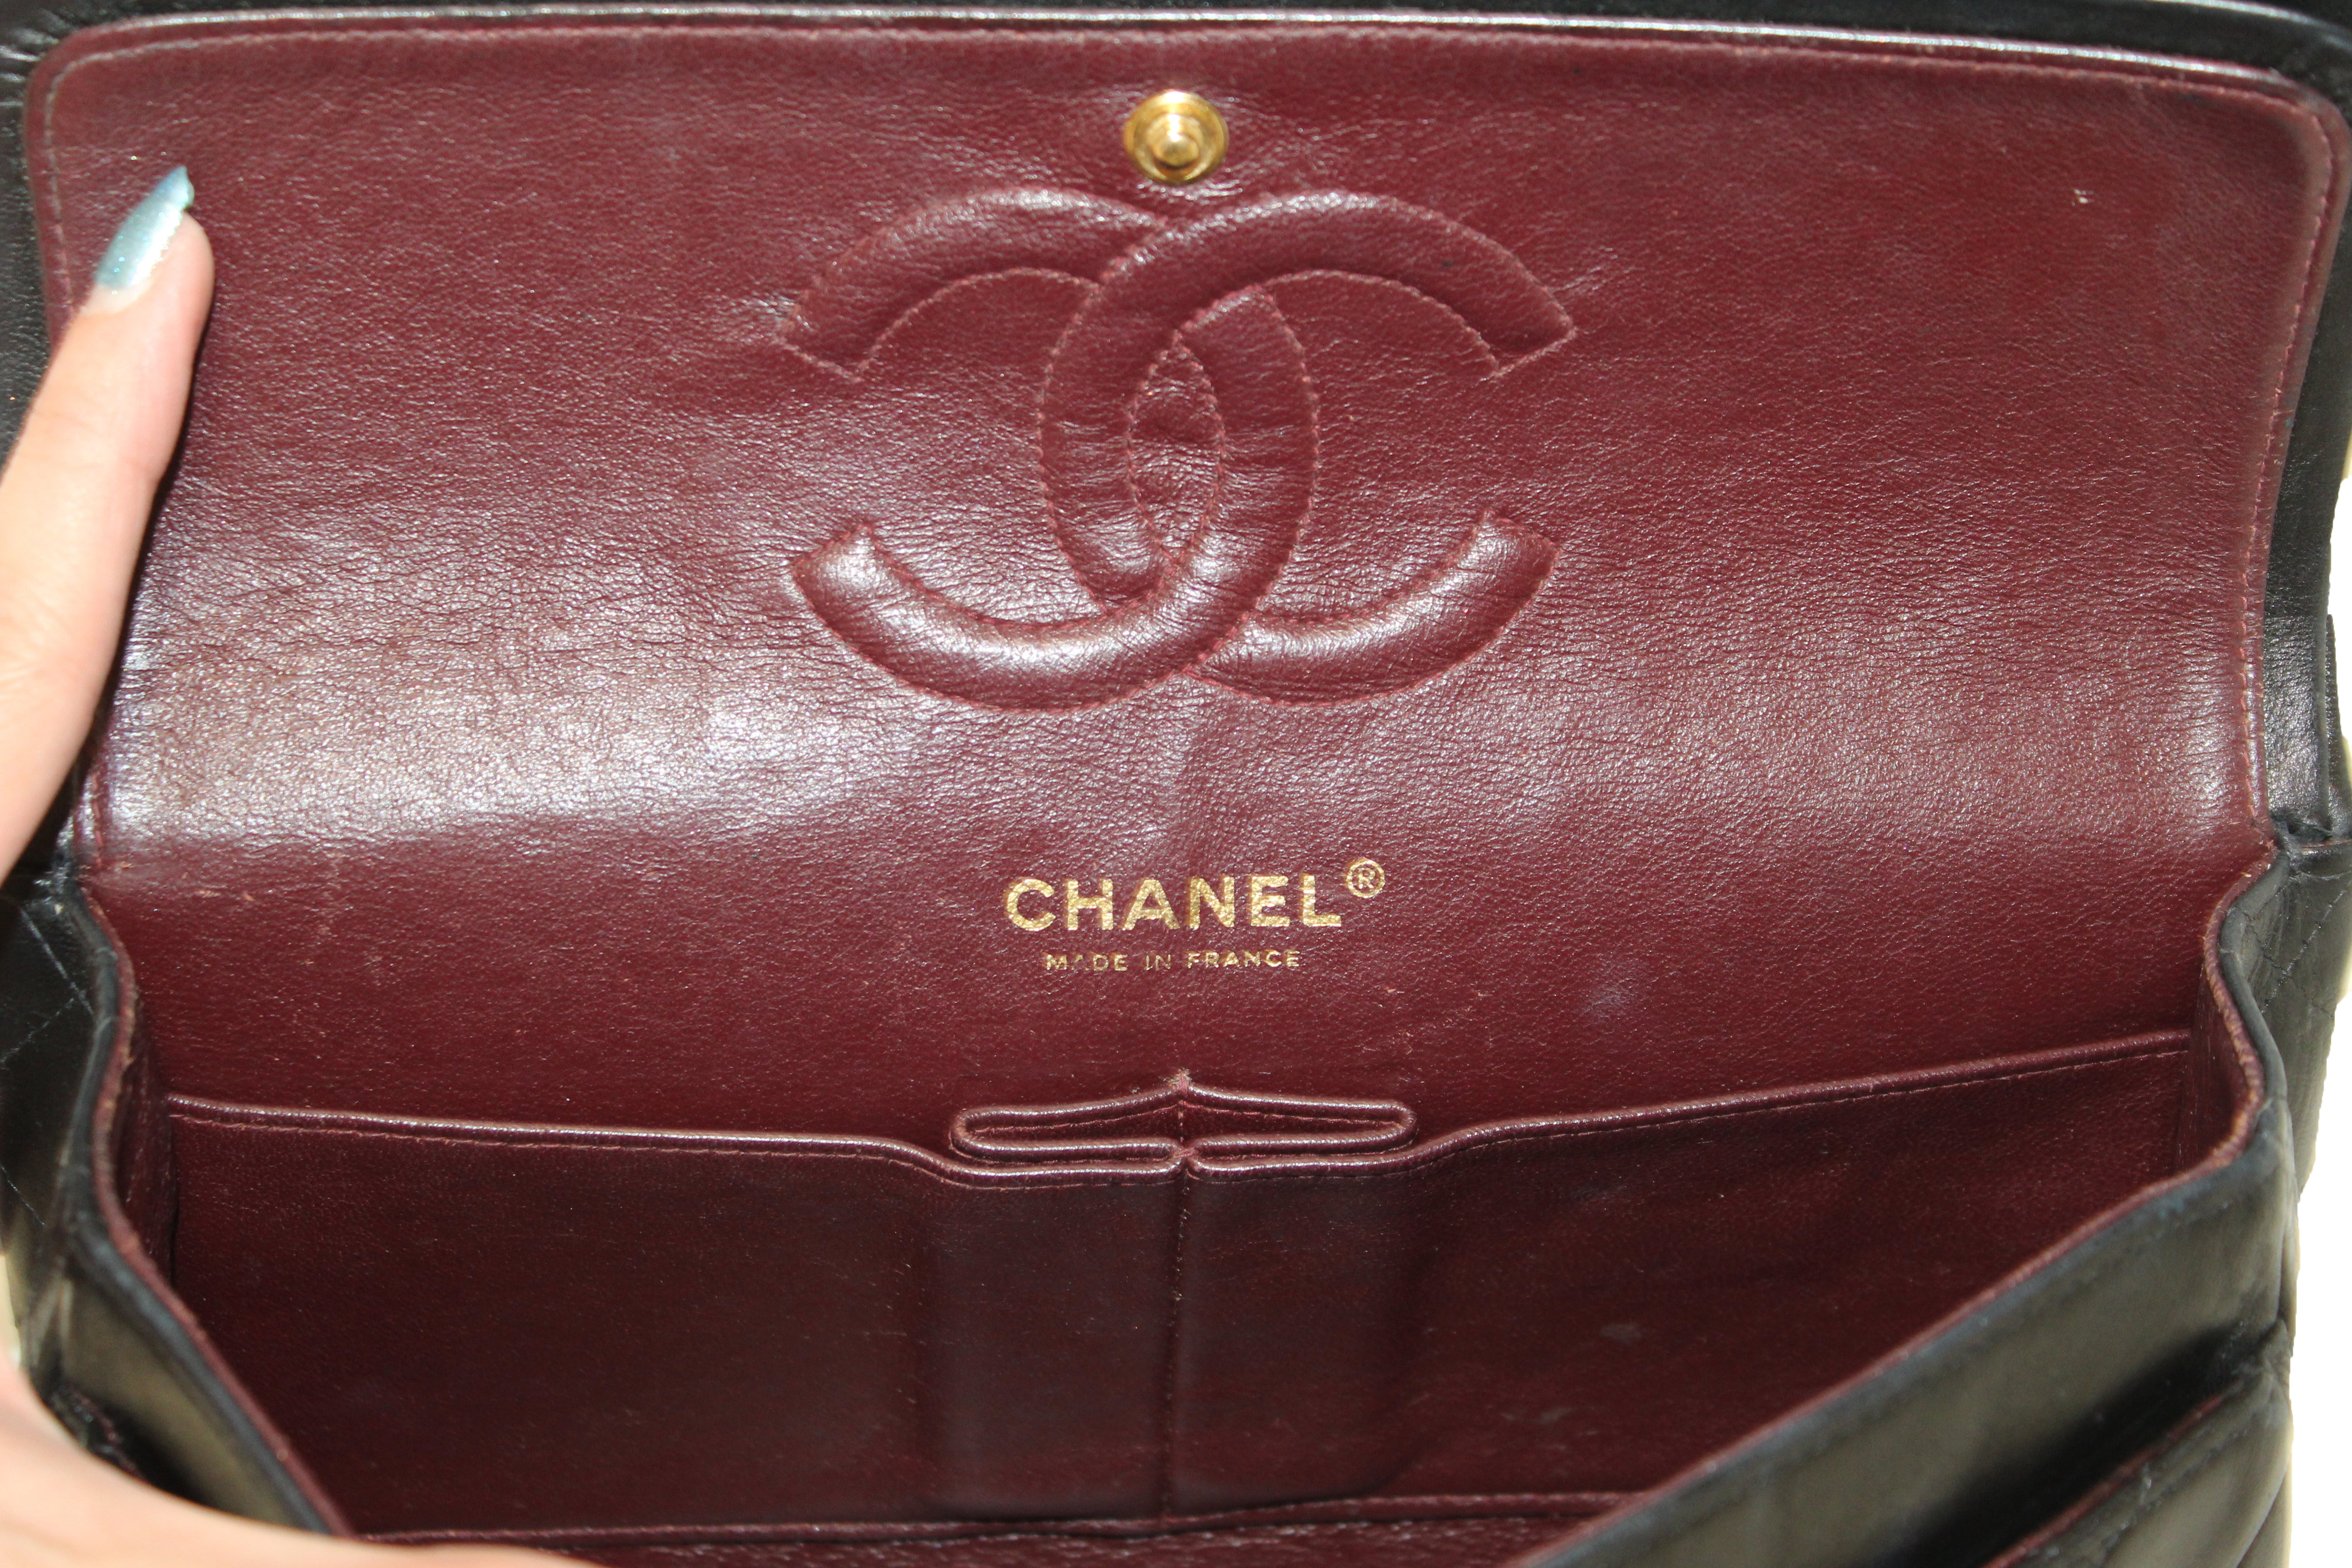 CHANEL, Bags, Vintage Authentic Chanel Wallet France